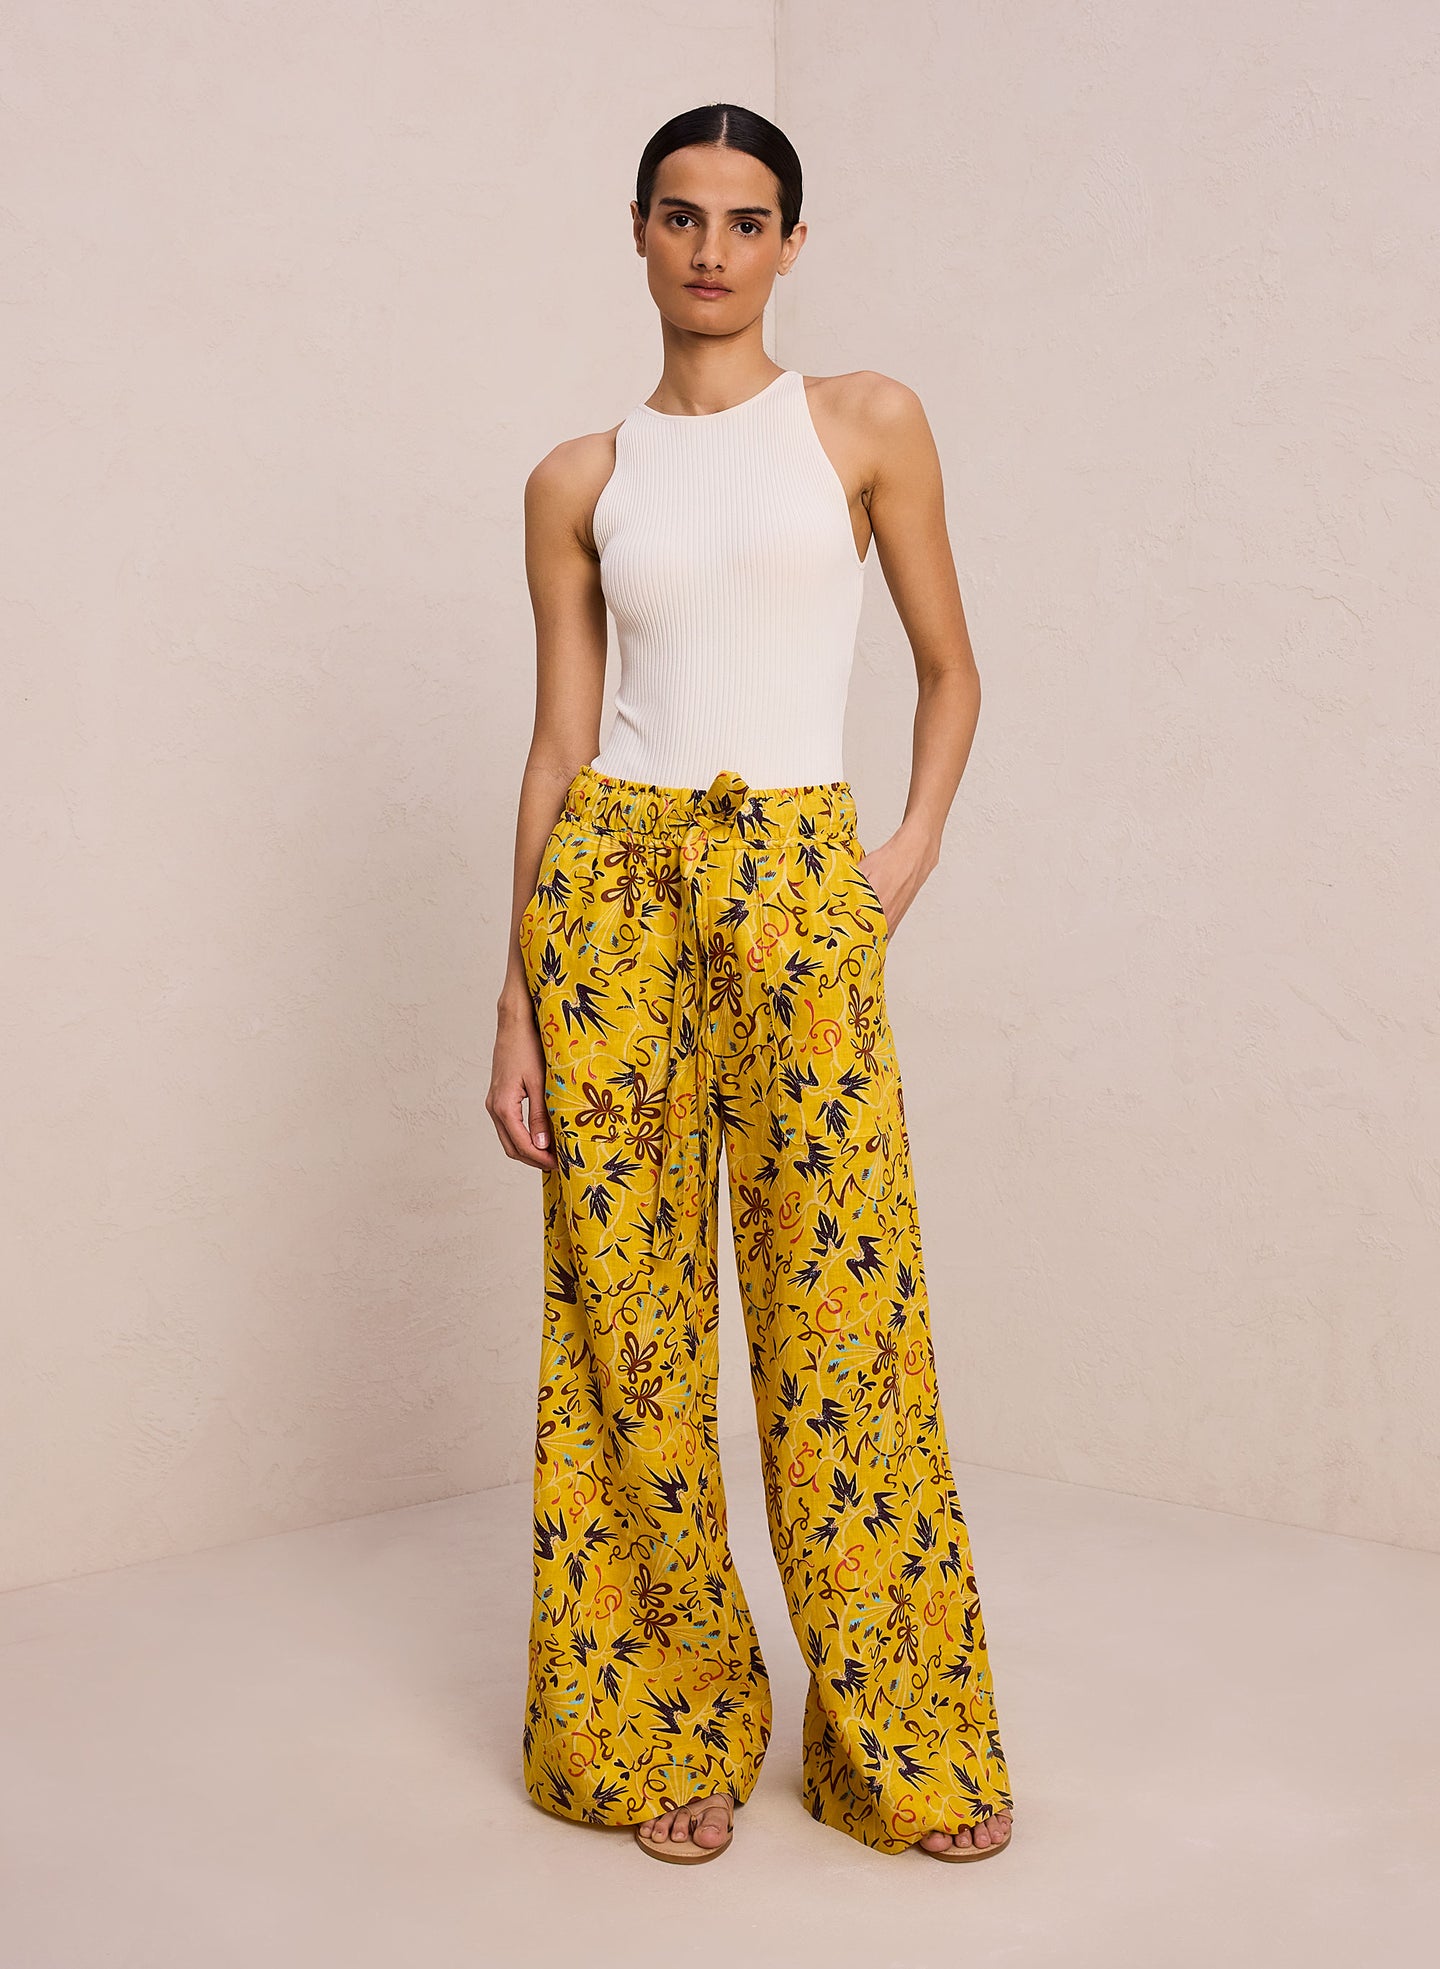 front view of woman wearing off white bodysuit and yellow printed wide leg pants